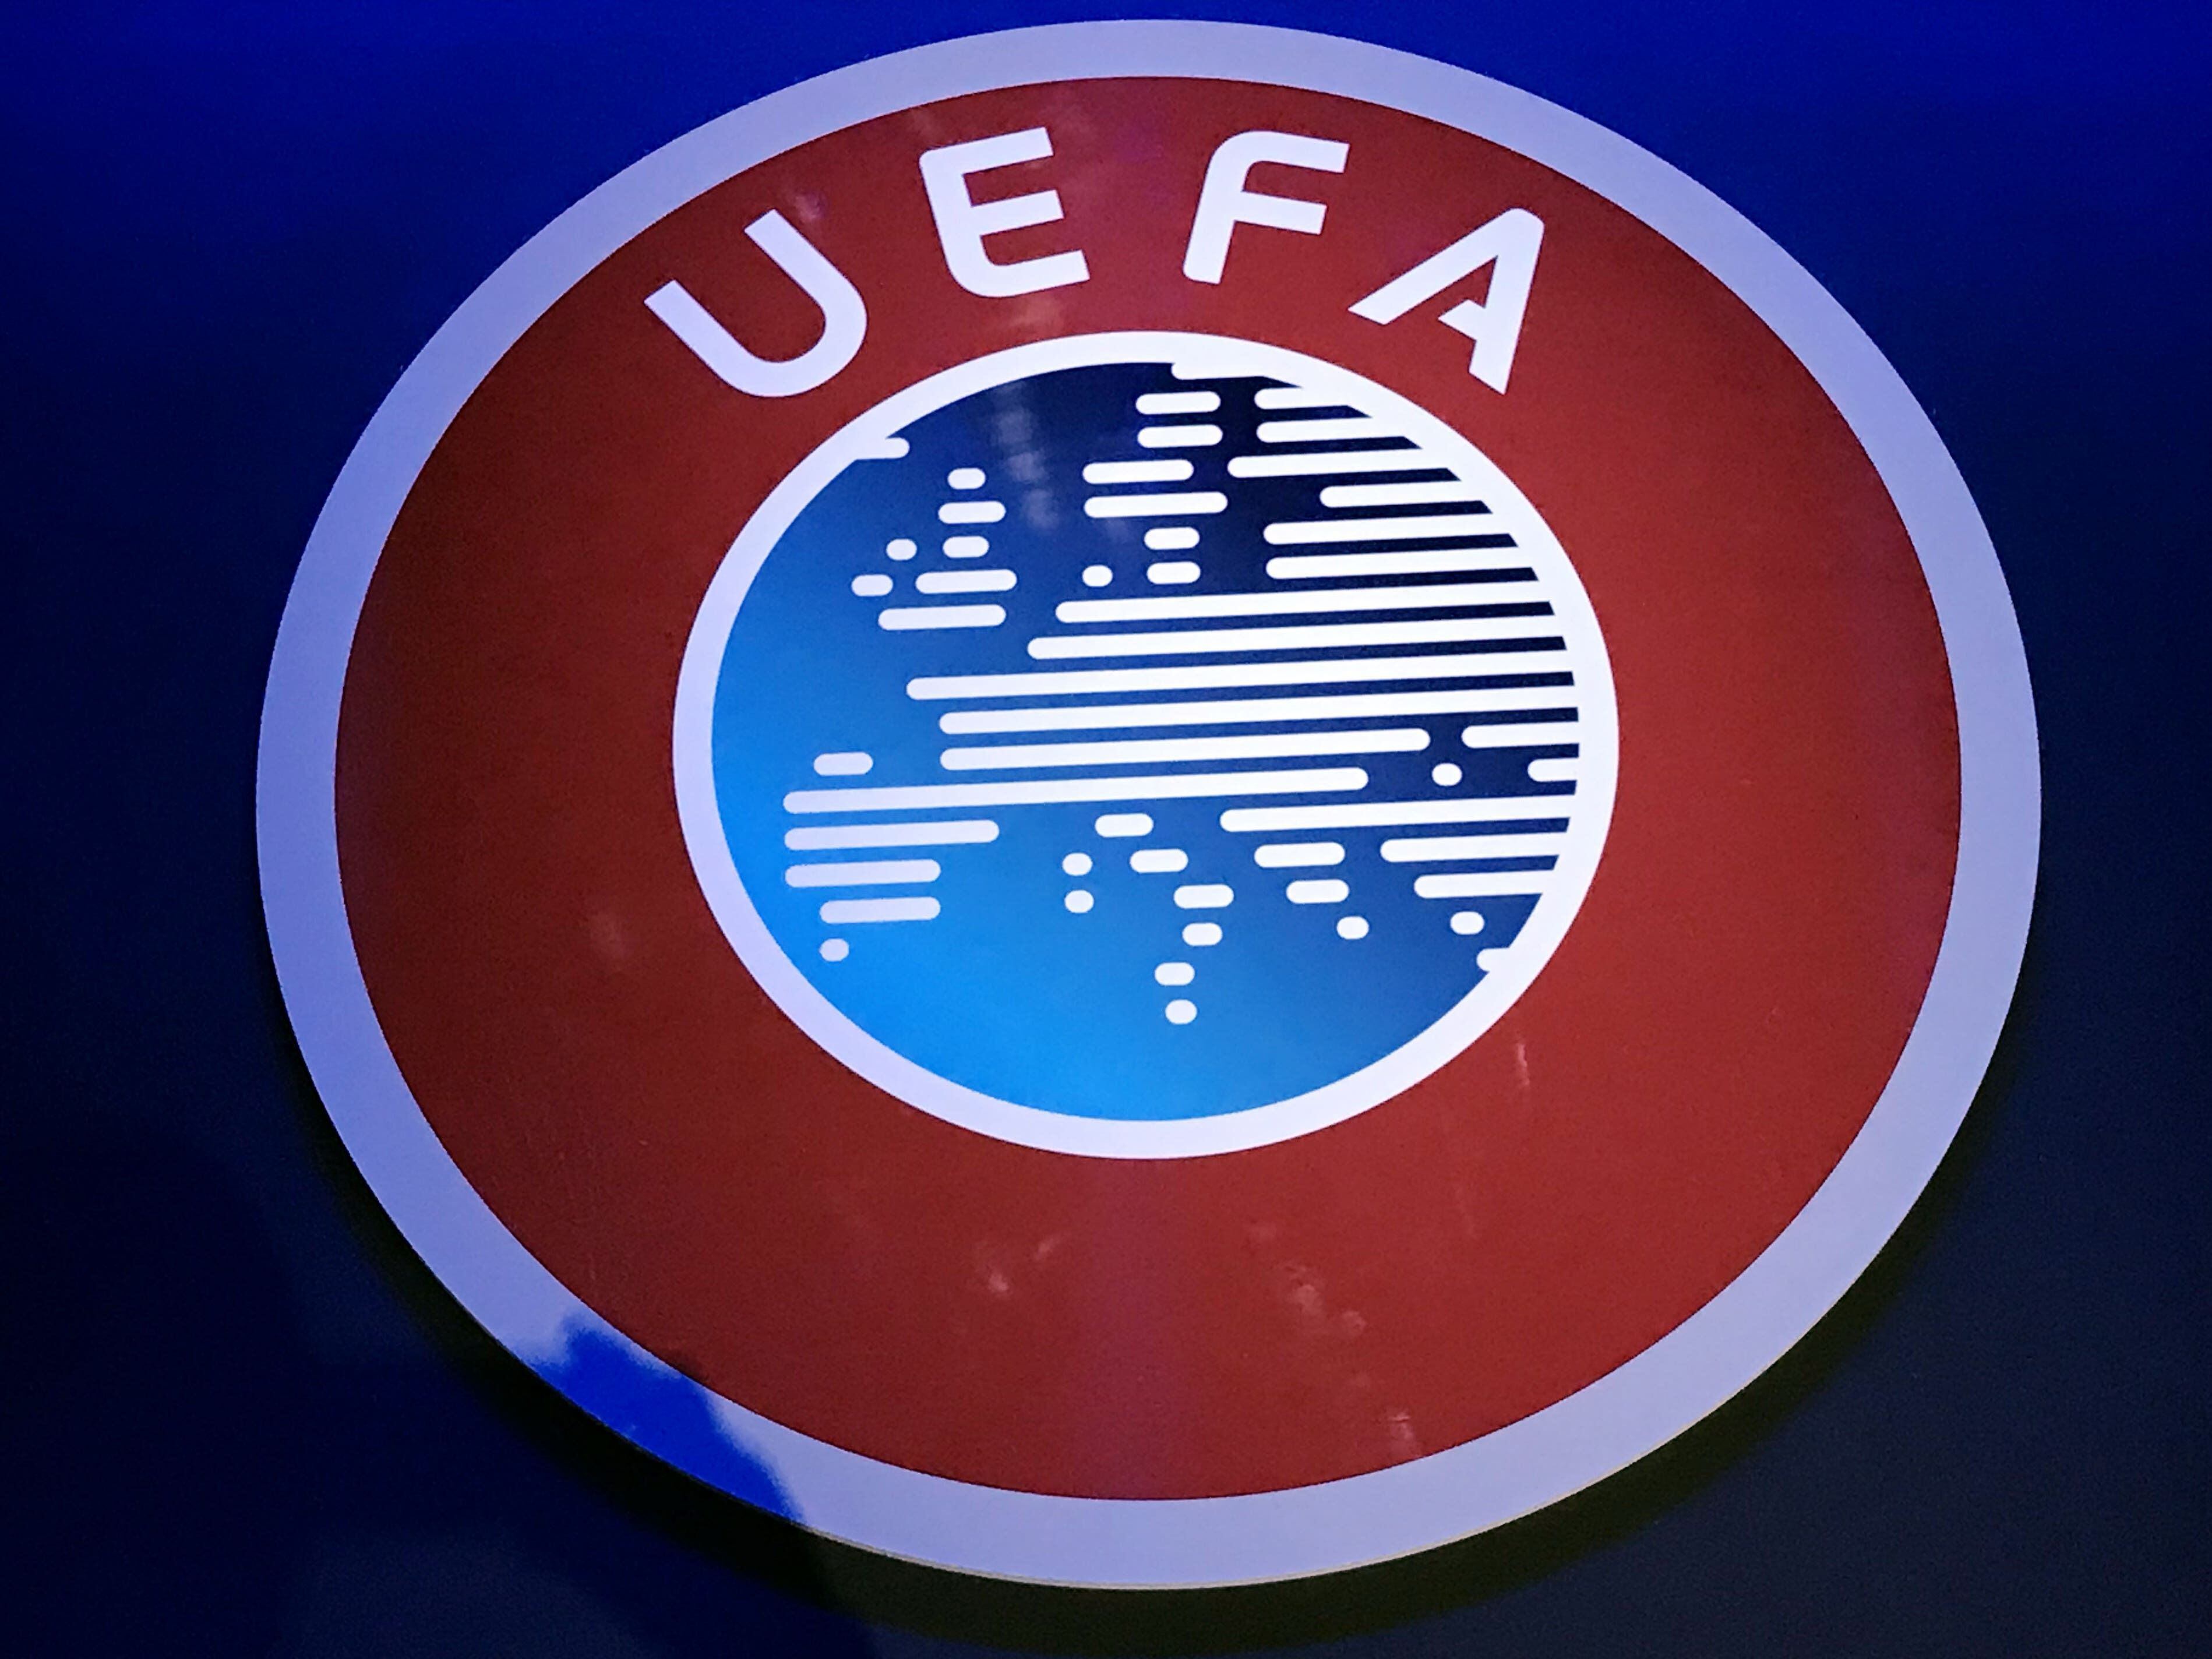 UEFA criticised for partnering with cryptocurrency fan token company